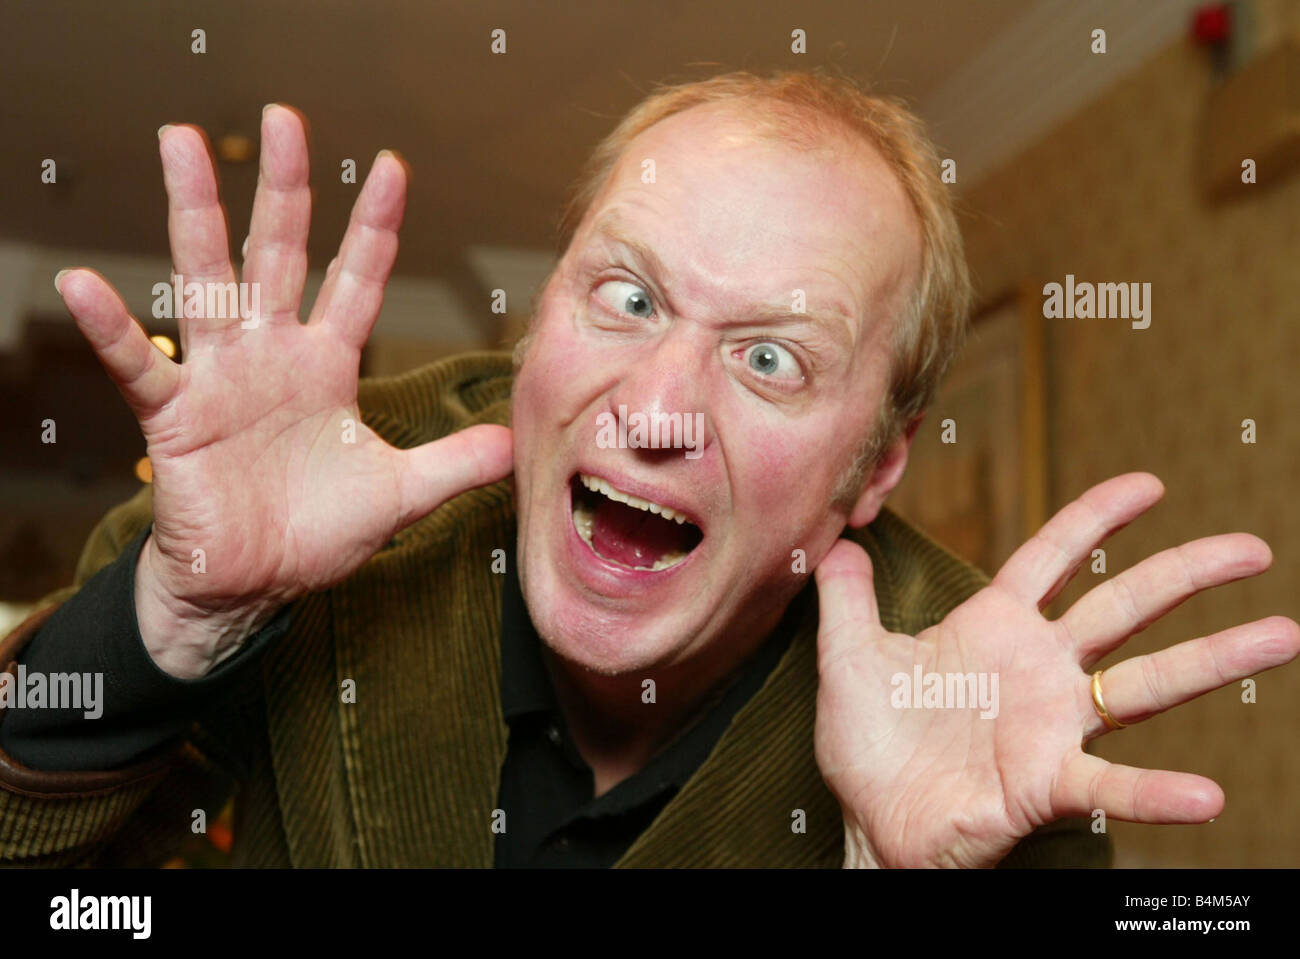 Actor Adrian Edmondson seen here pulling a silly face November 2004 Stock Photo